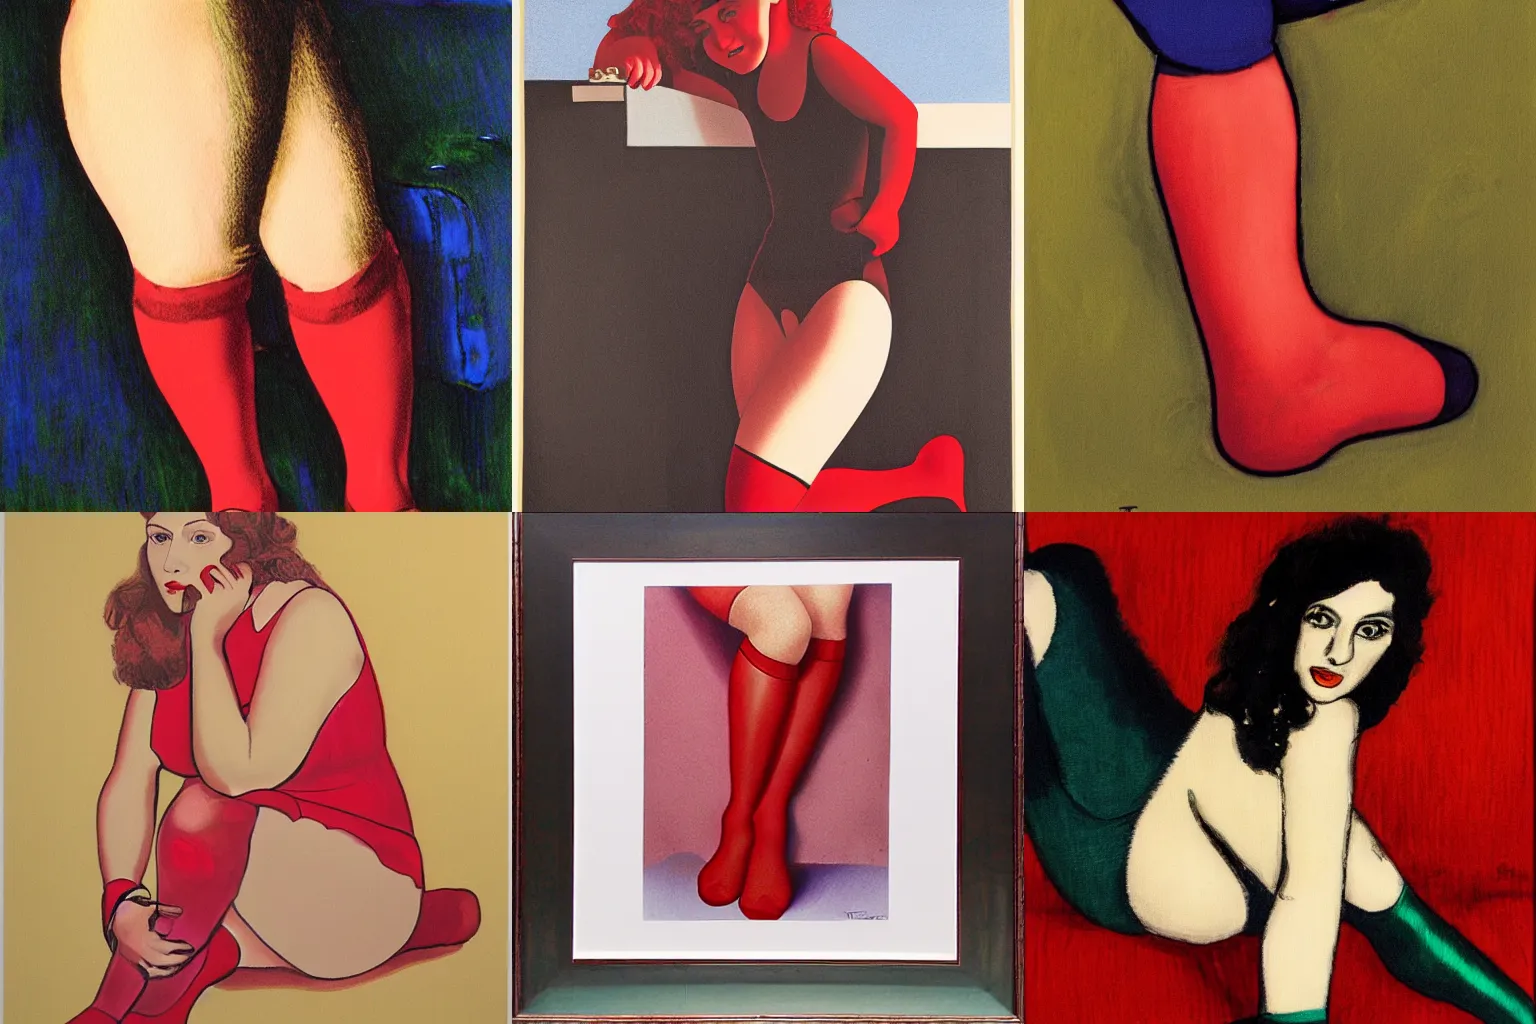 Prompt: bernadette with red stockings, lithograph by Tom Wessellmann